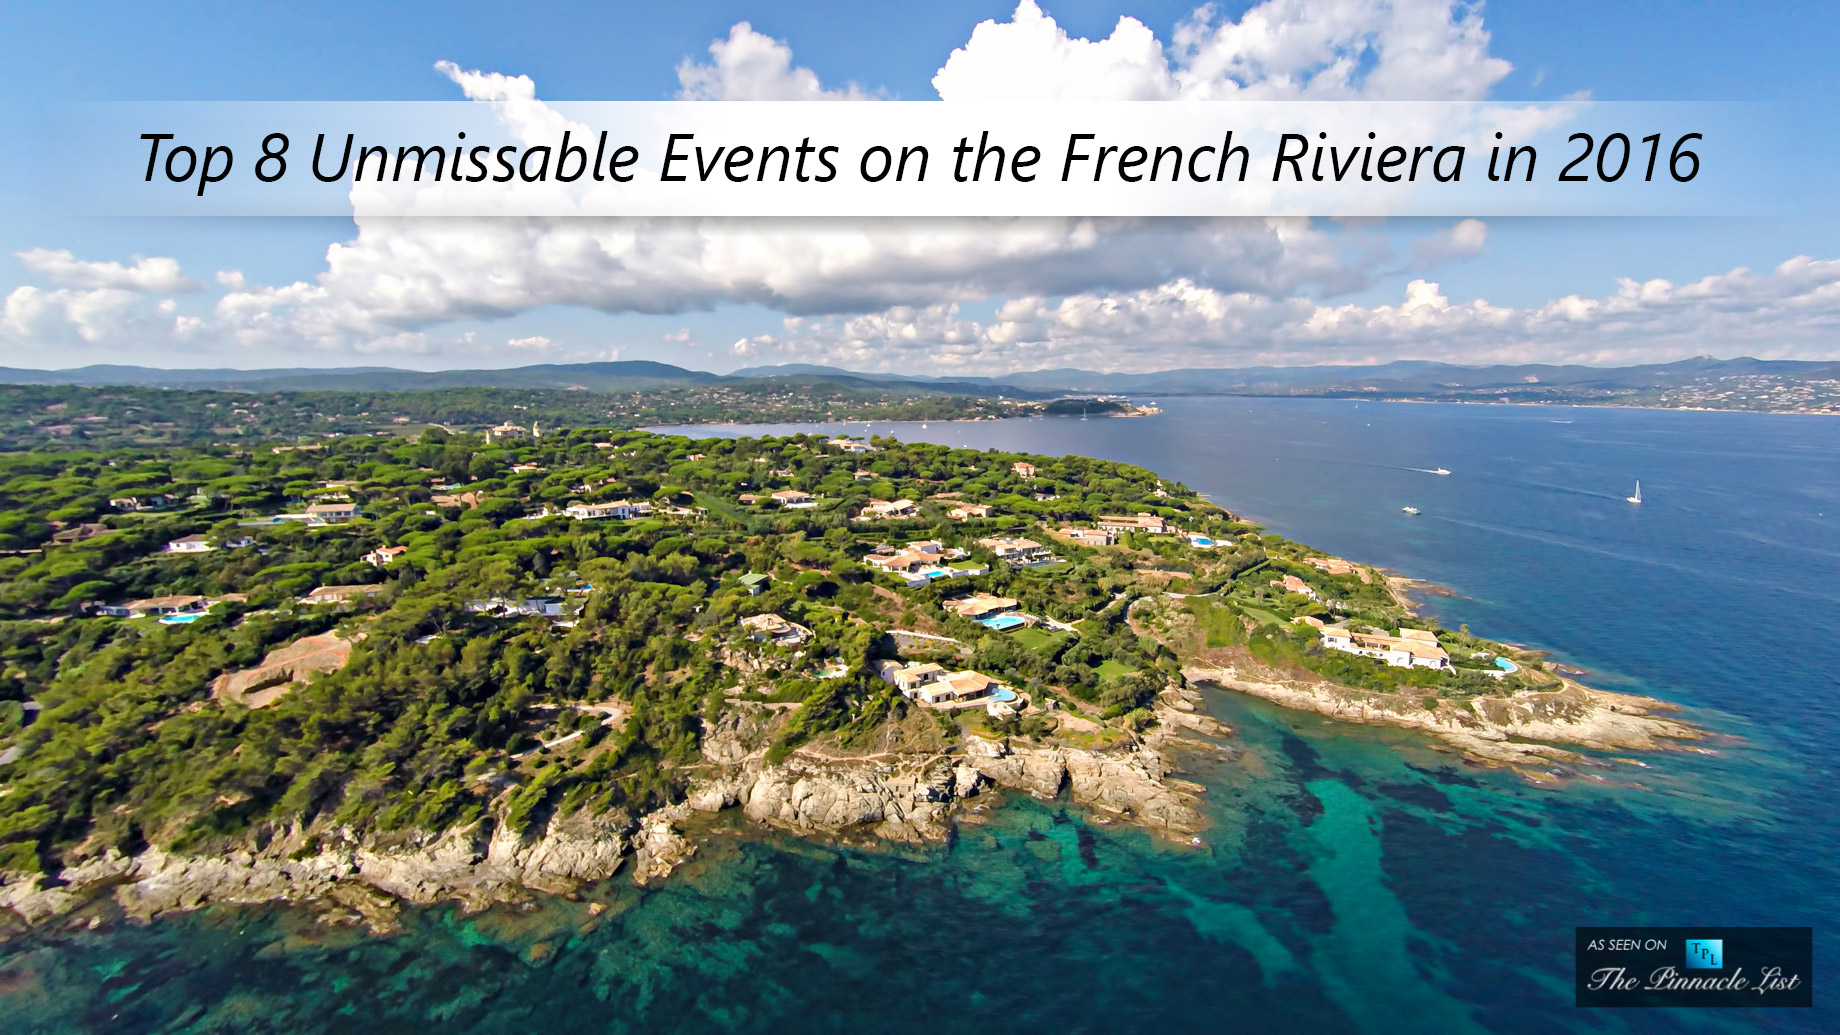 Top 8 Unmissable Events on the French Riviera in 2016